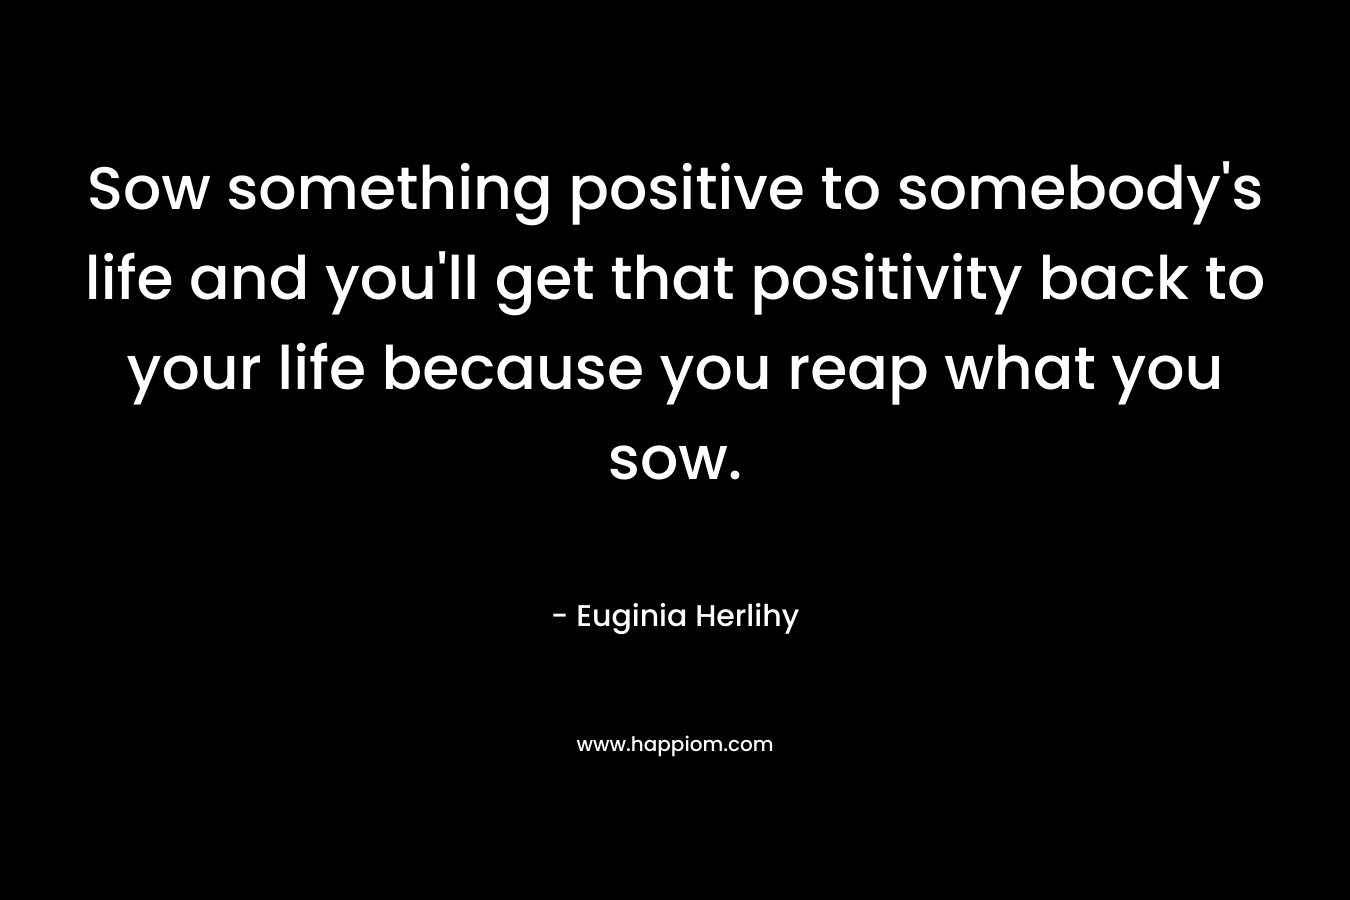 Sow something positive to somebody's life and you'll get that positivity back to your life because you reap what you sow.